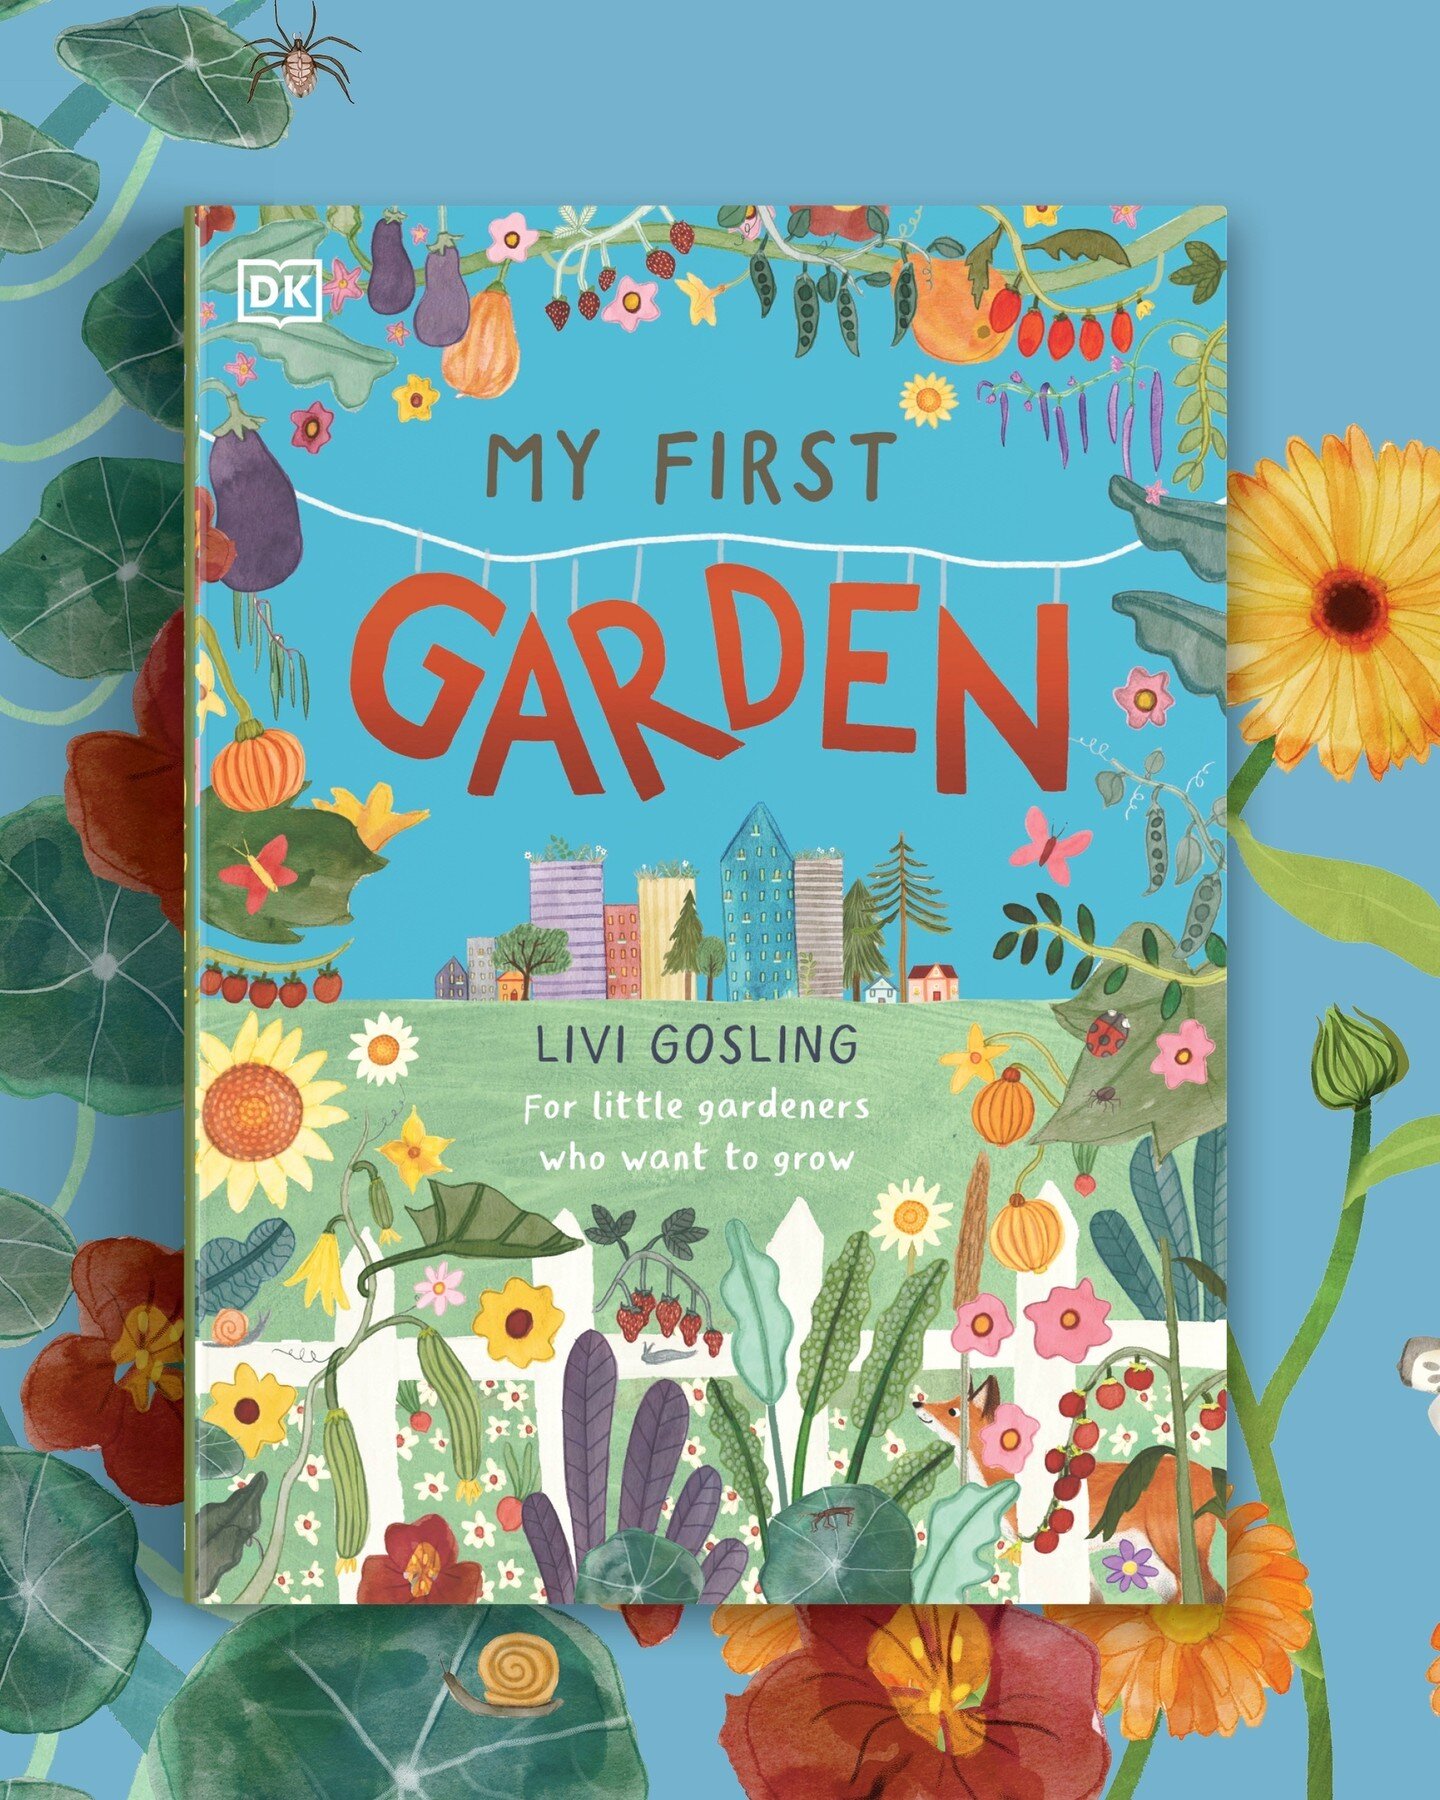 Today&rsquo;s the day! My First Garden is OUT NOW 🌻

I am so inordinately chuffed with it. A huge thanks to @DKbooks for being so wonderful throughout the whole process. It really has been a dream. 

&lsquo;This is a gardening book for kids who like